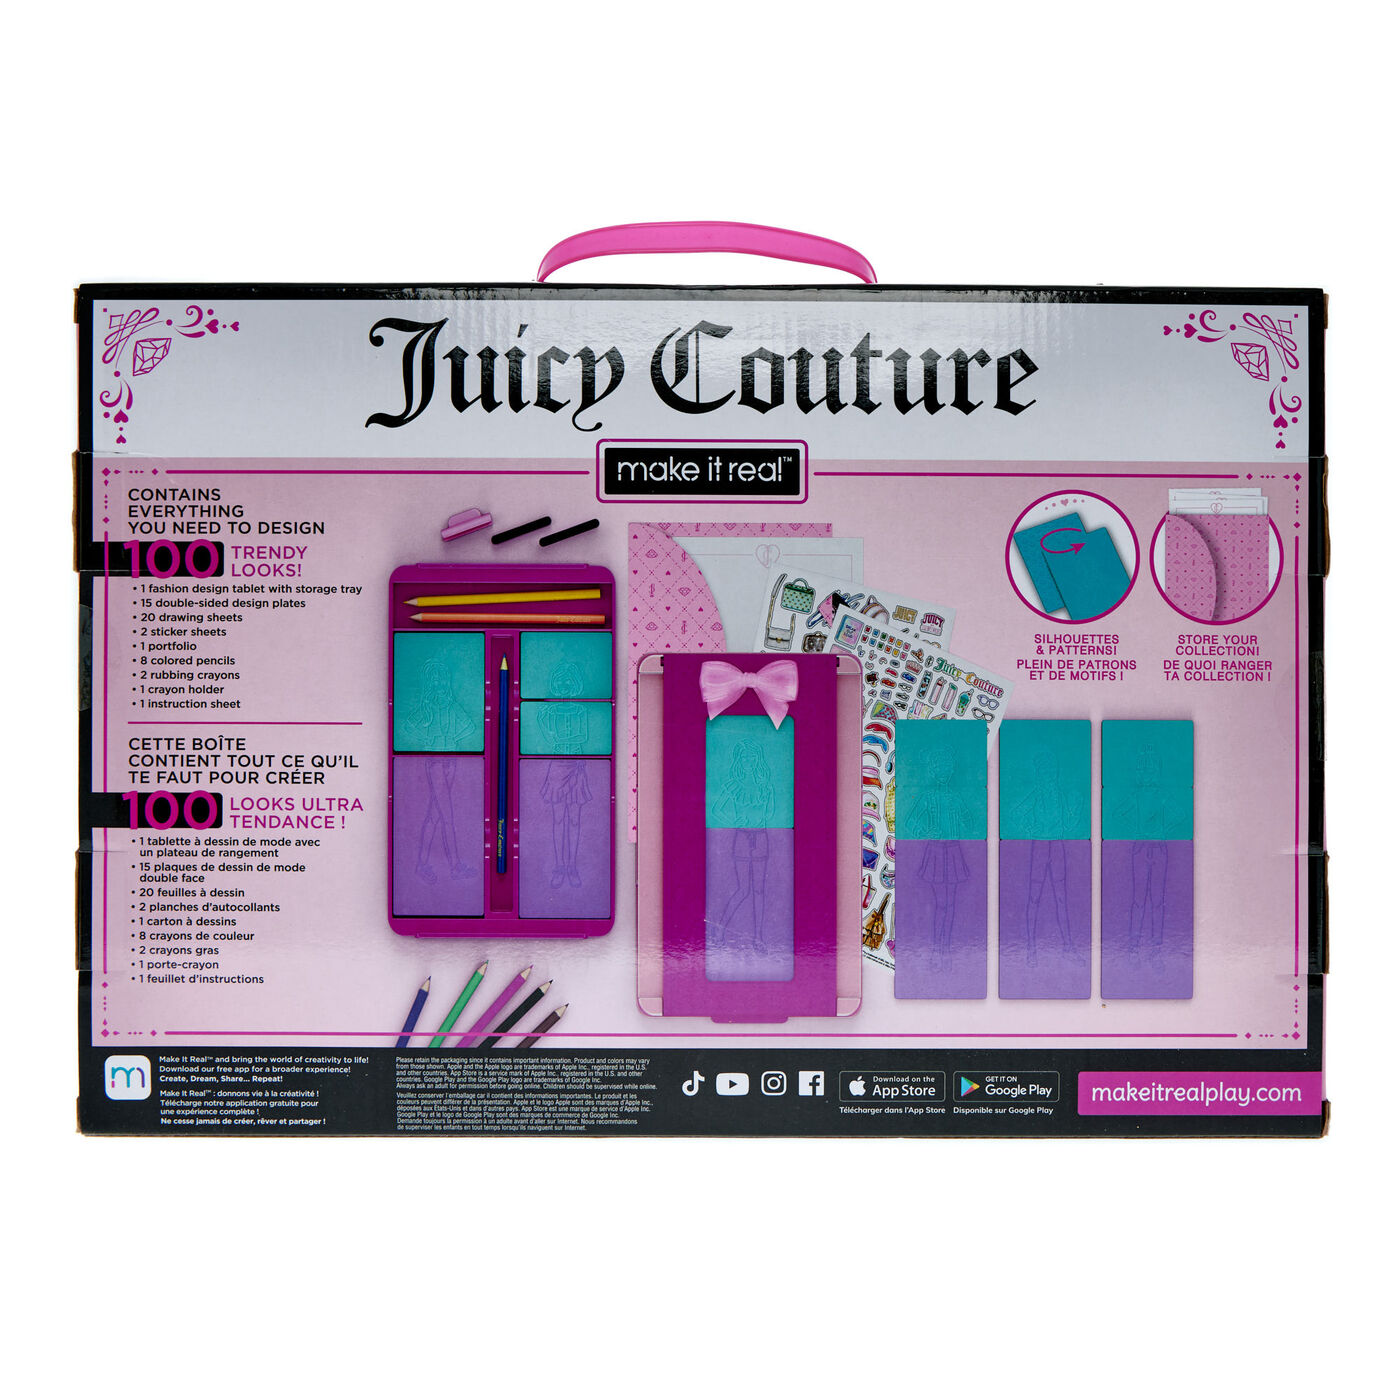 Buy Juicy Couture Fashion Exchange Set for GBP 19.99 | Card Factory UK